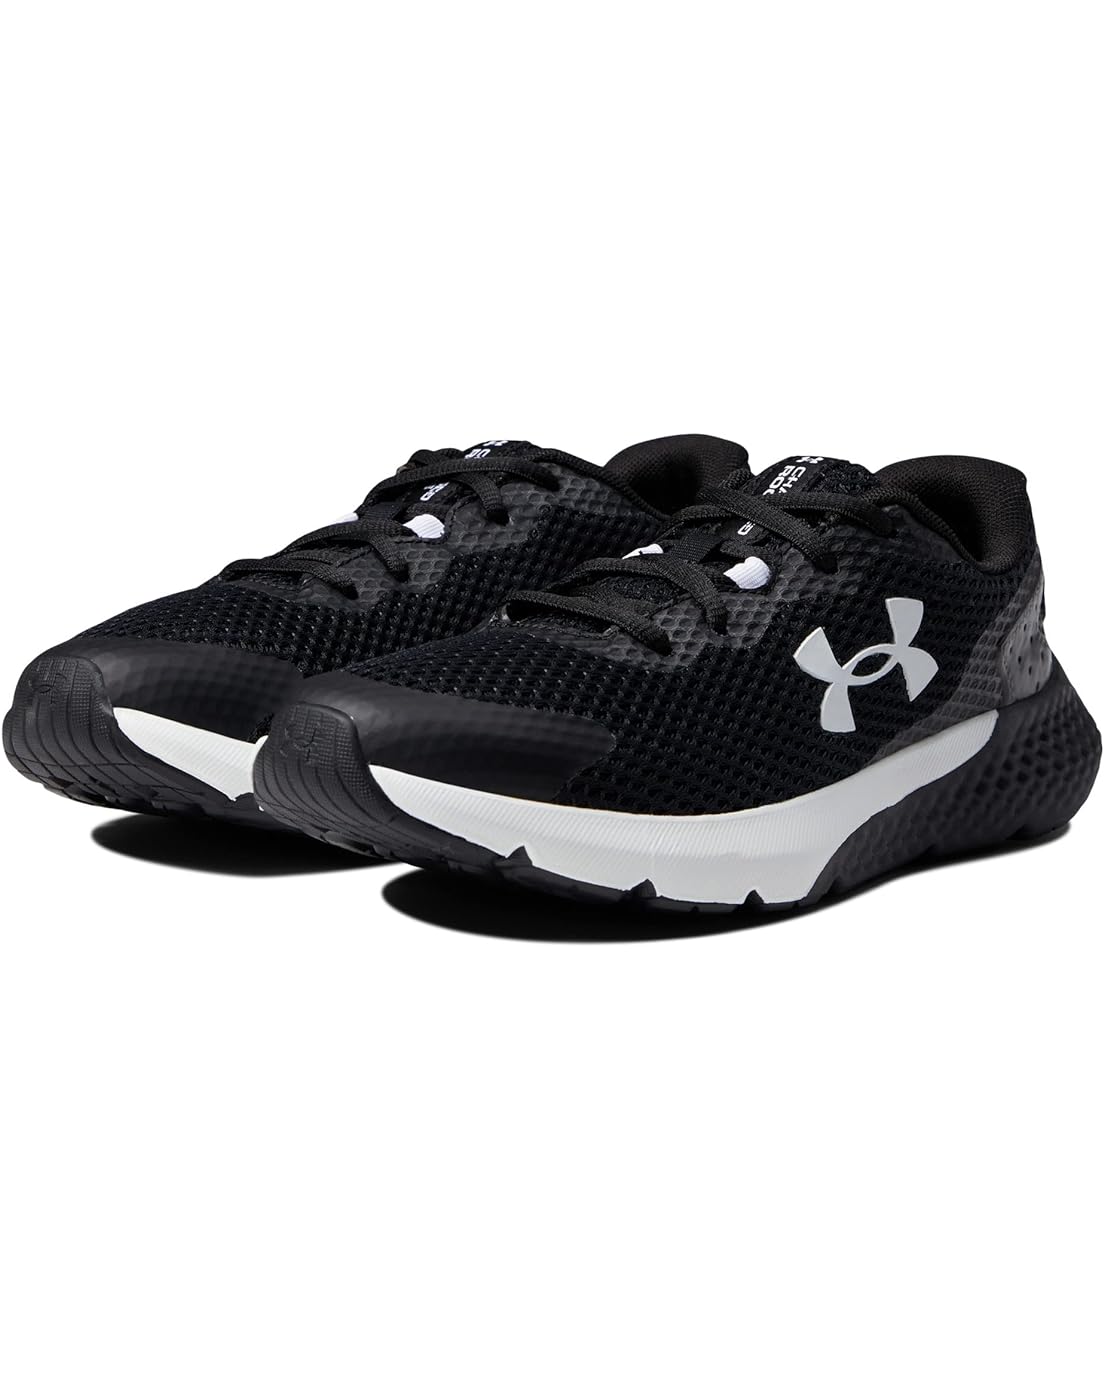 Under Armour Kids Charged Rogue 3 (Big Kid)